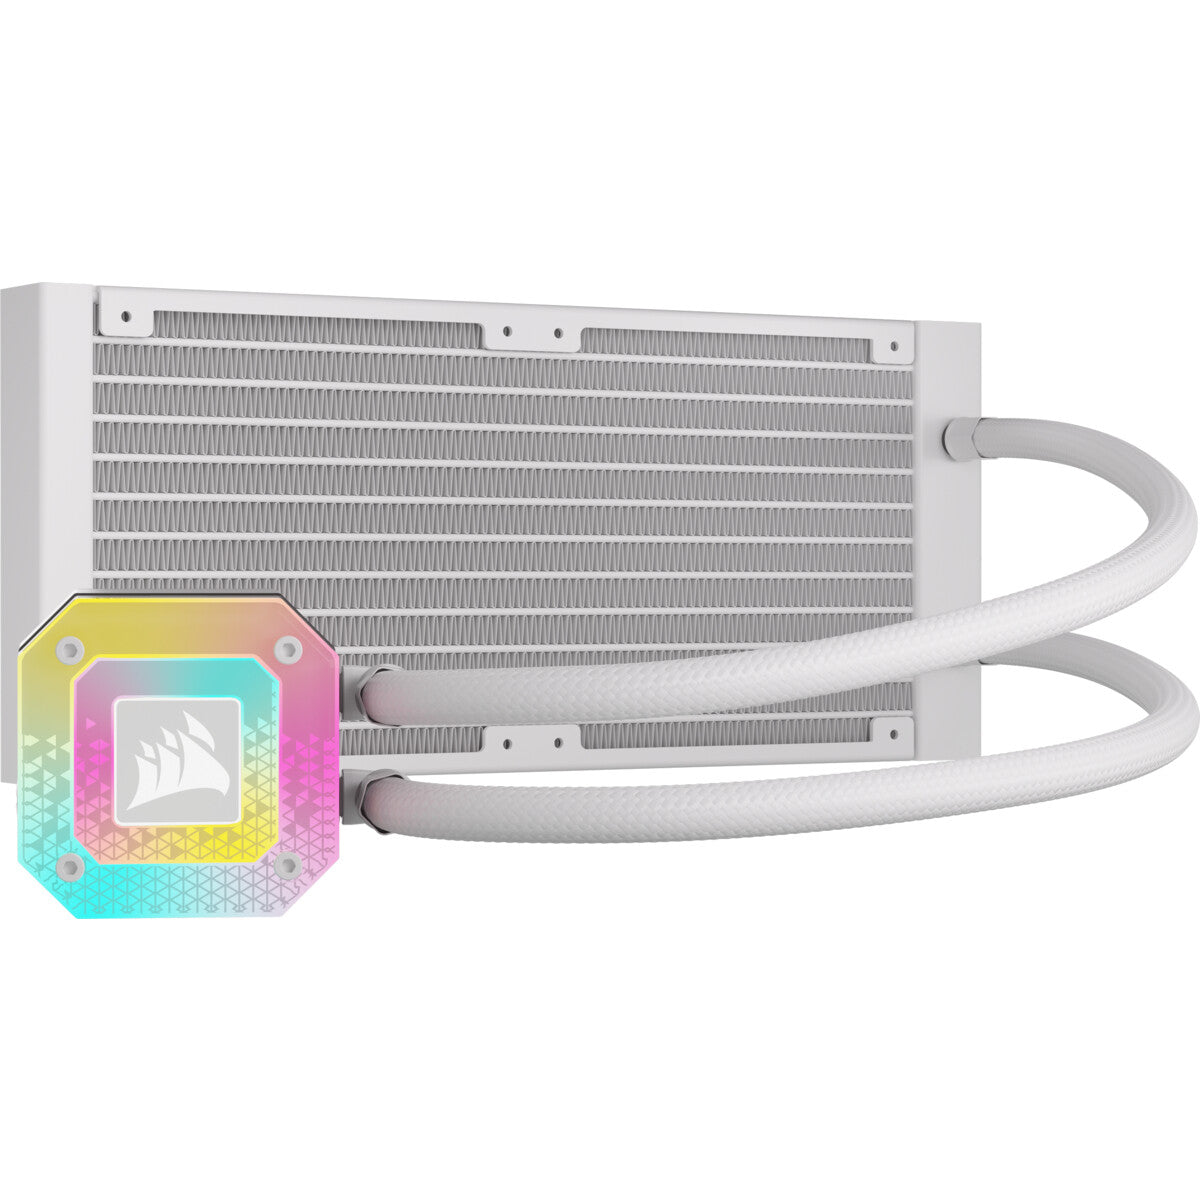 Corsair iCUE H100i ELITE LCD - All-in-one Liquid Processor Cooler in White - 120mm